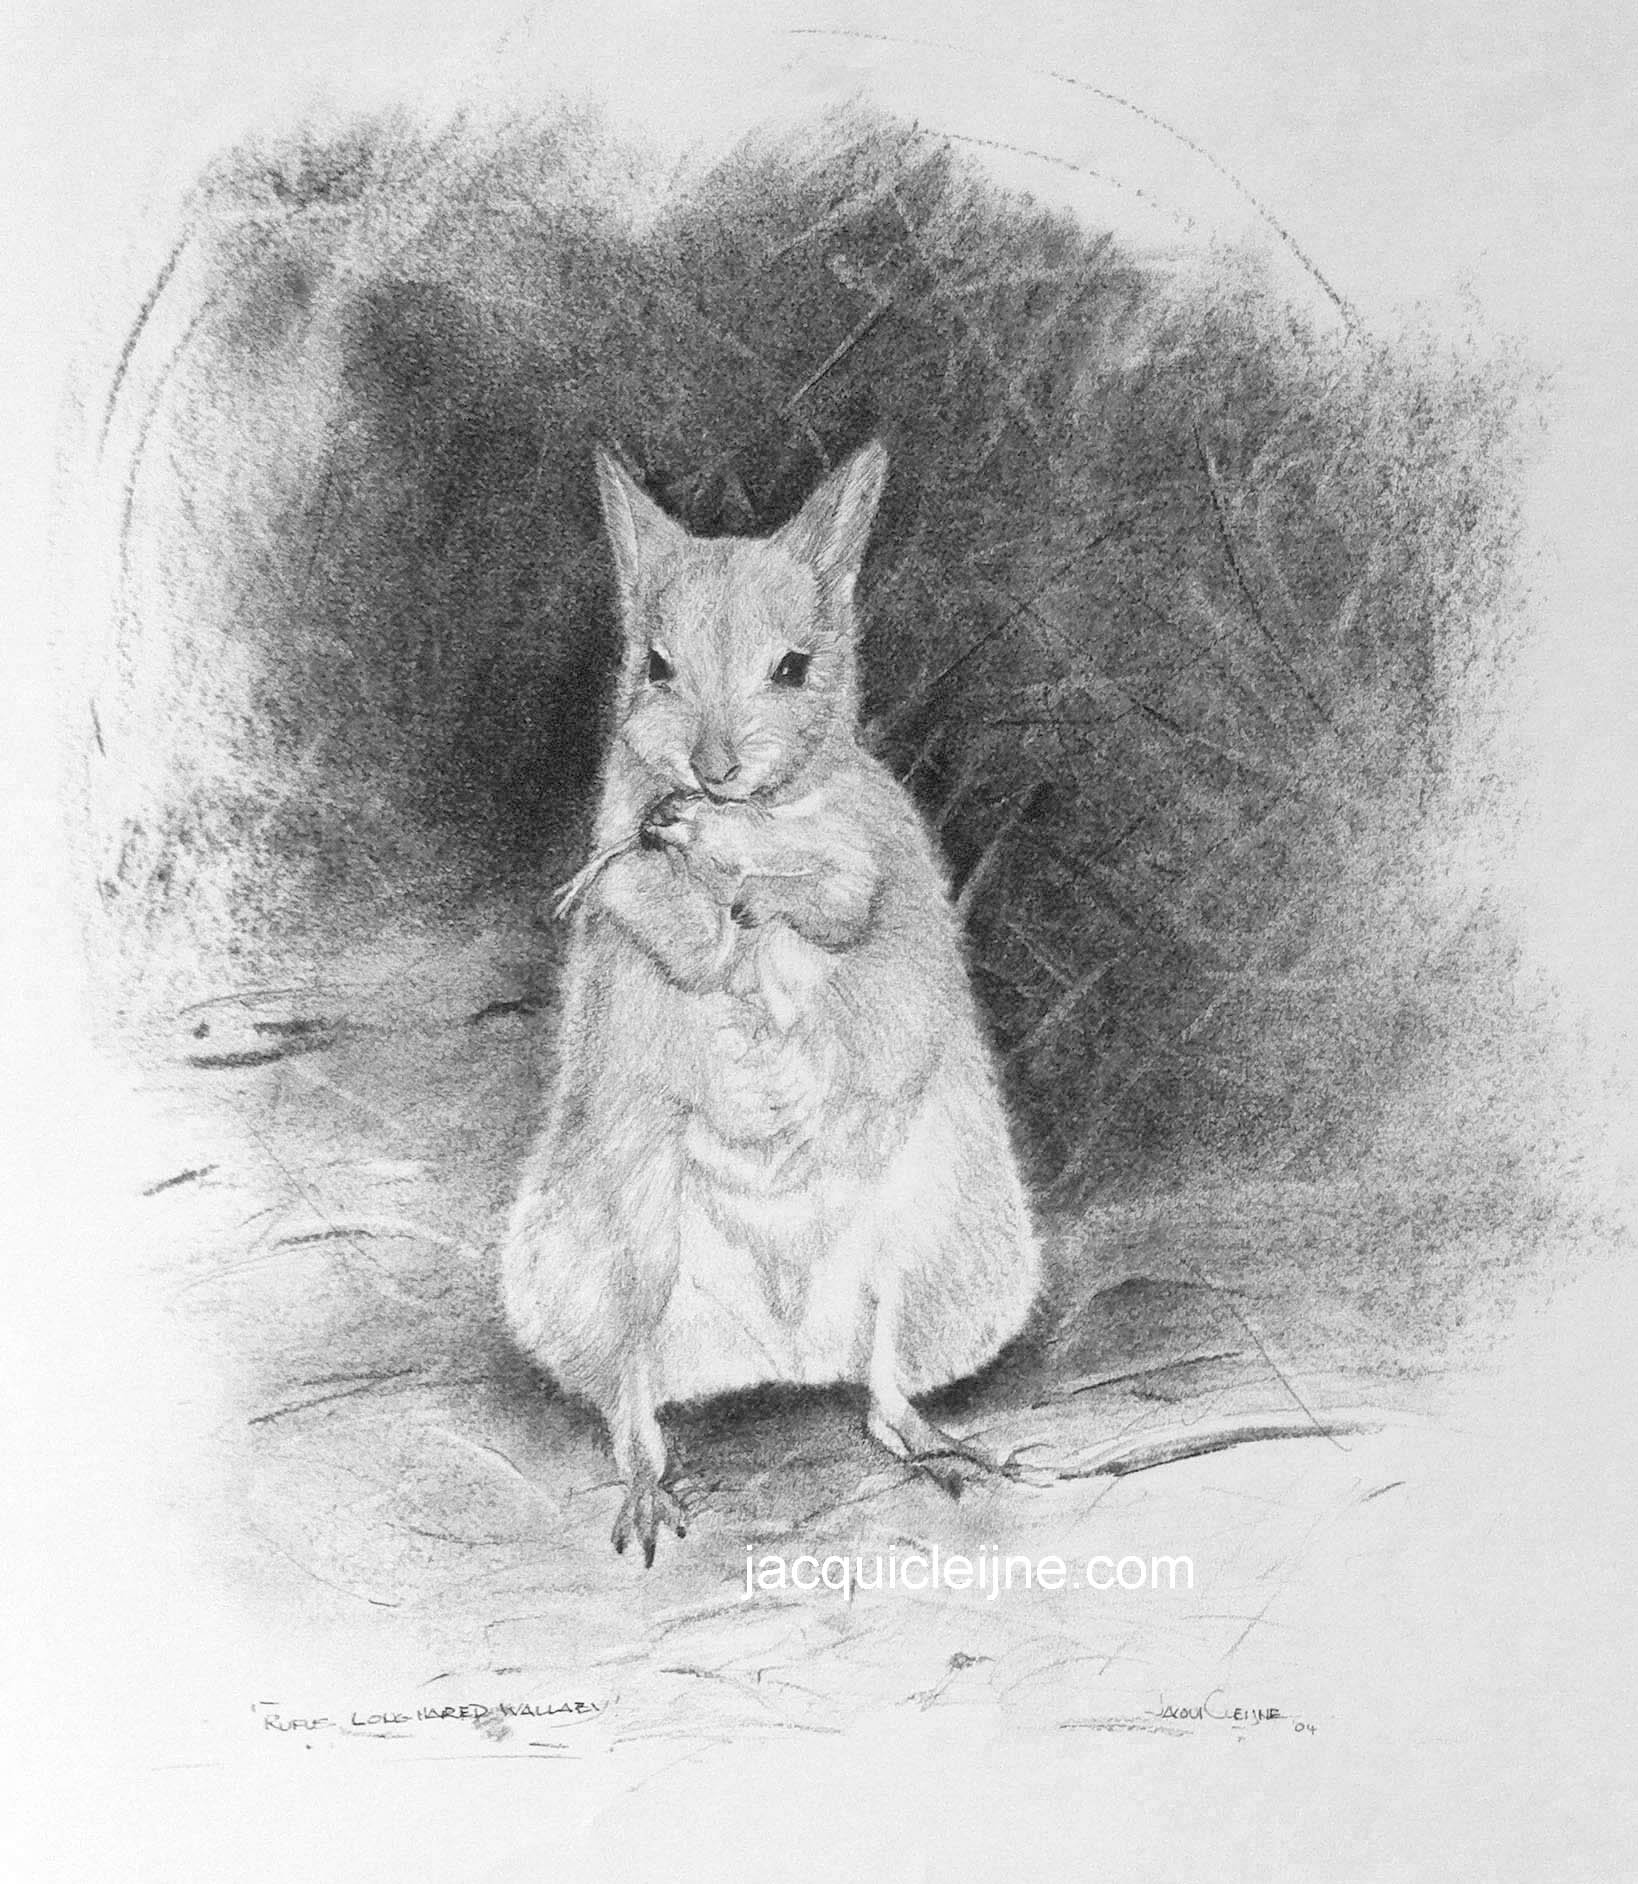 Rufus hare Wallaby - SOLD